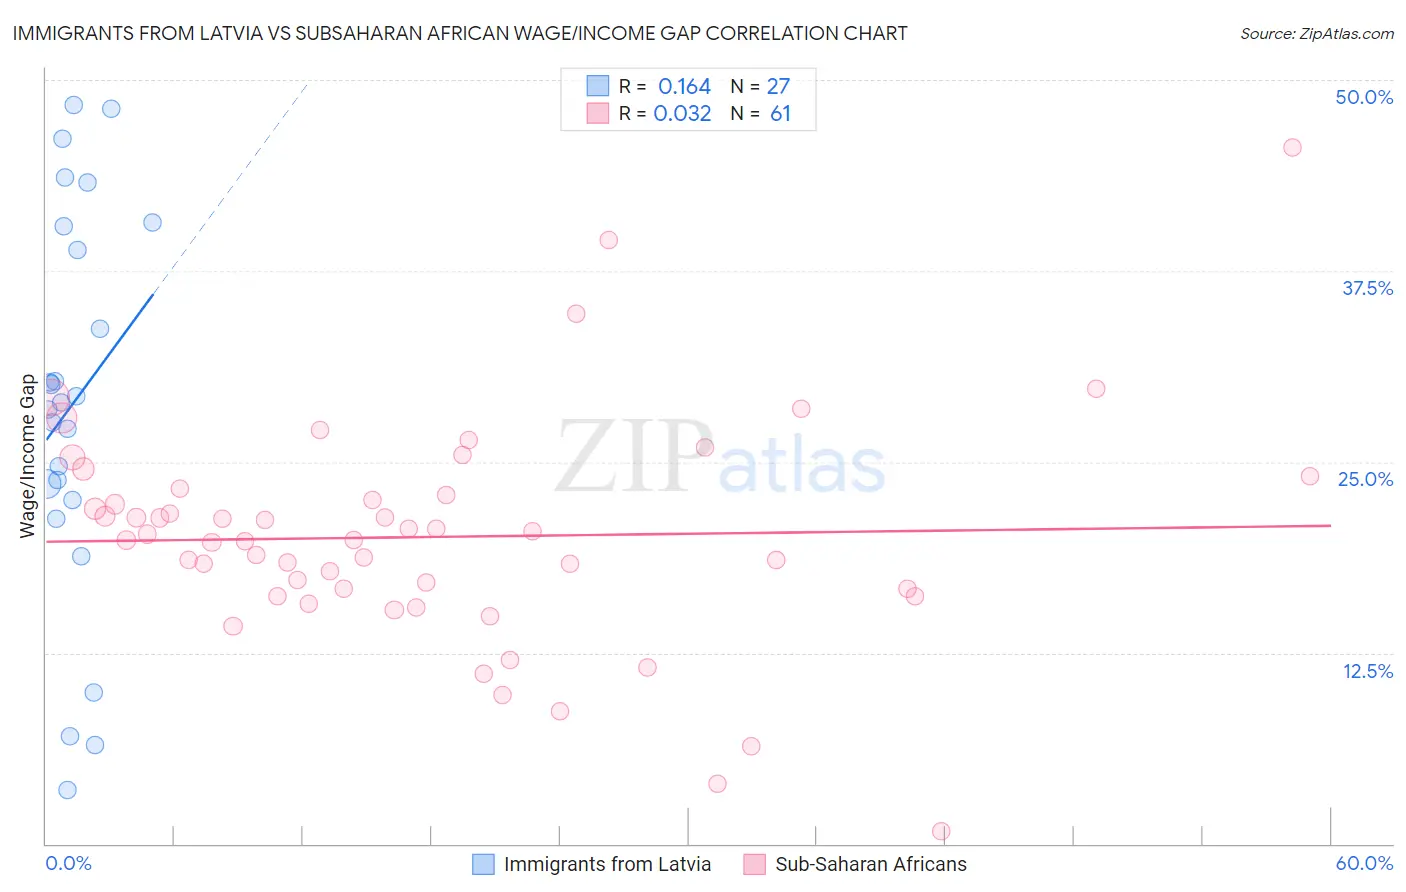 Immigrants from Latvia vs Subsaharan African Wage/Income Gap